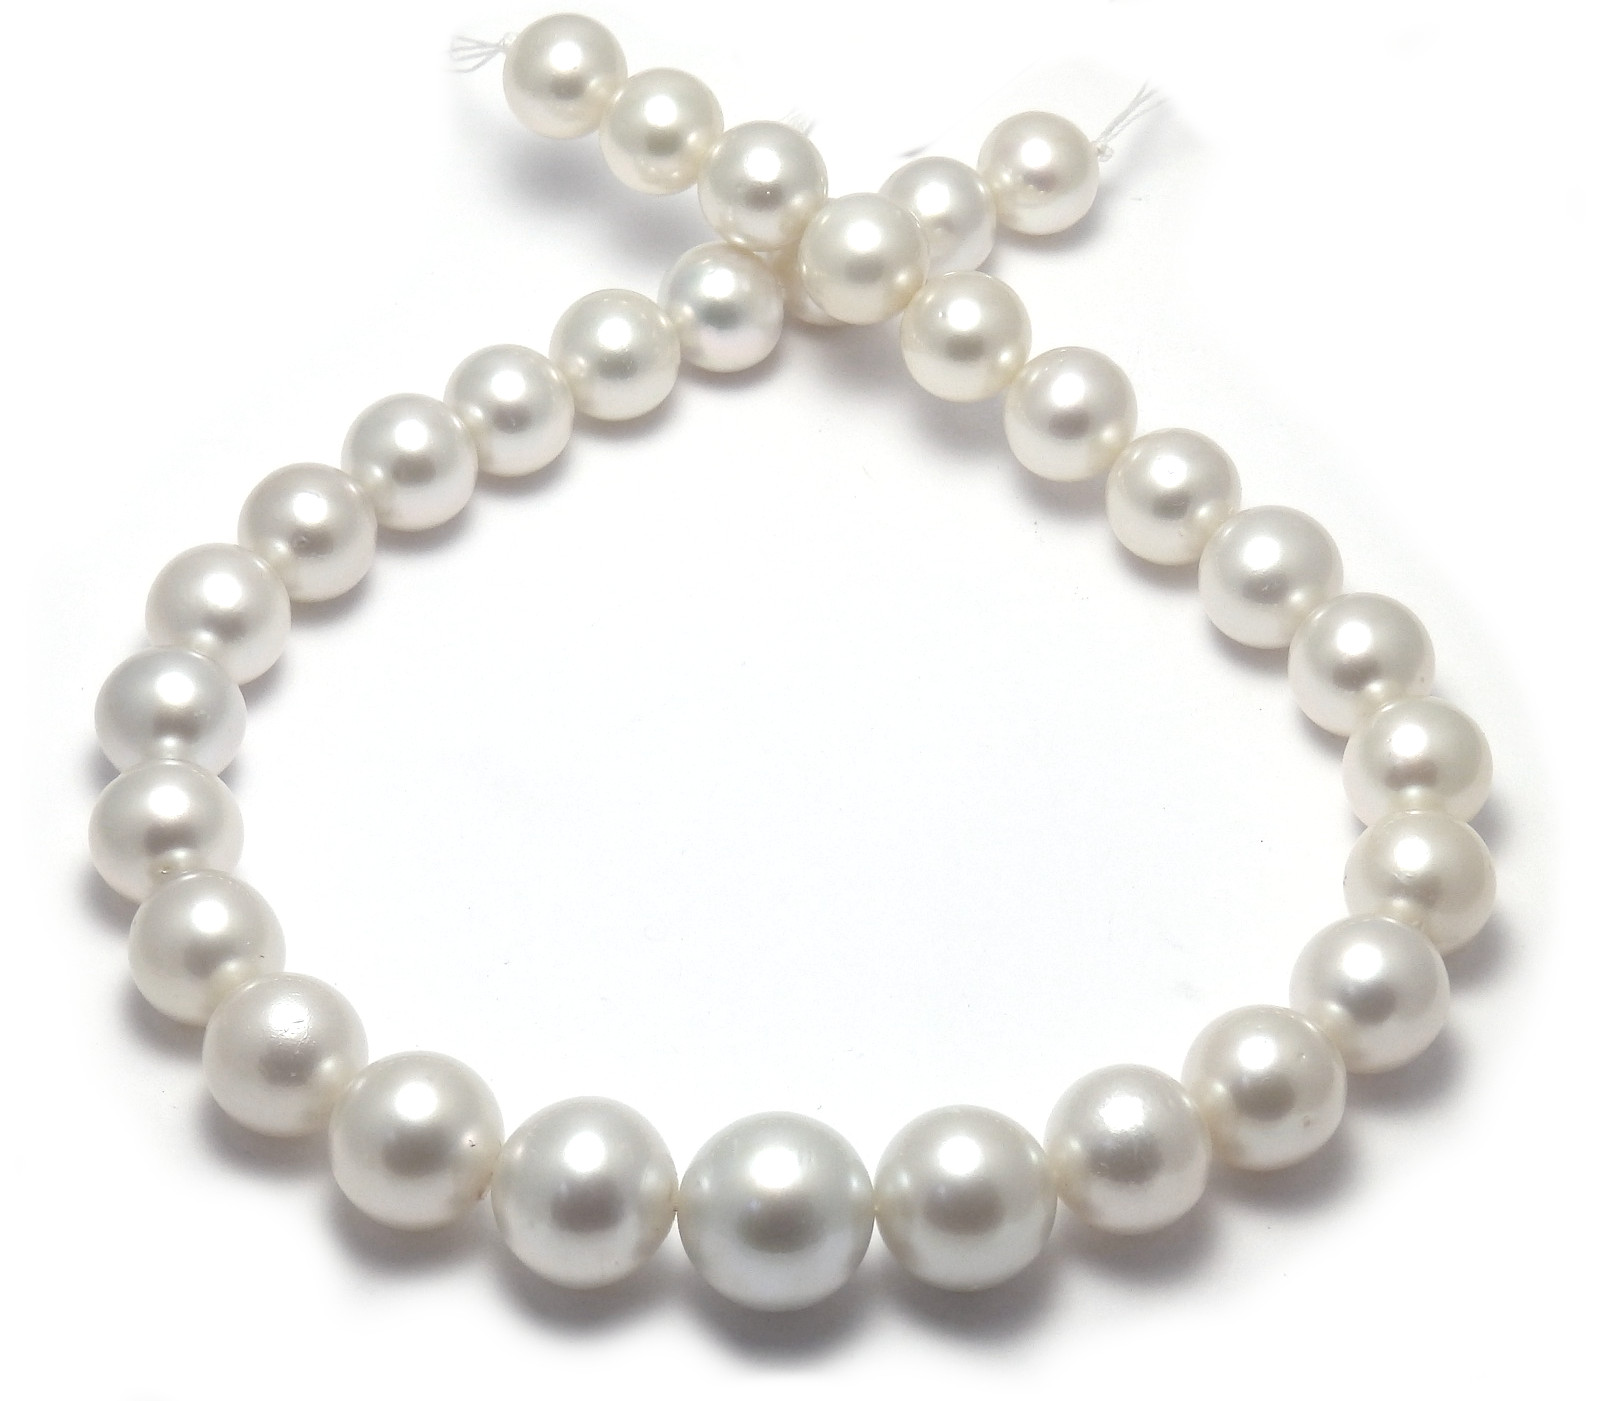 White South Sea Pearl Necklace with Round 17mm Pearl